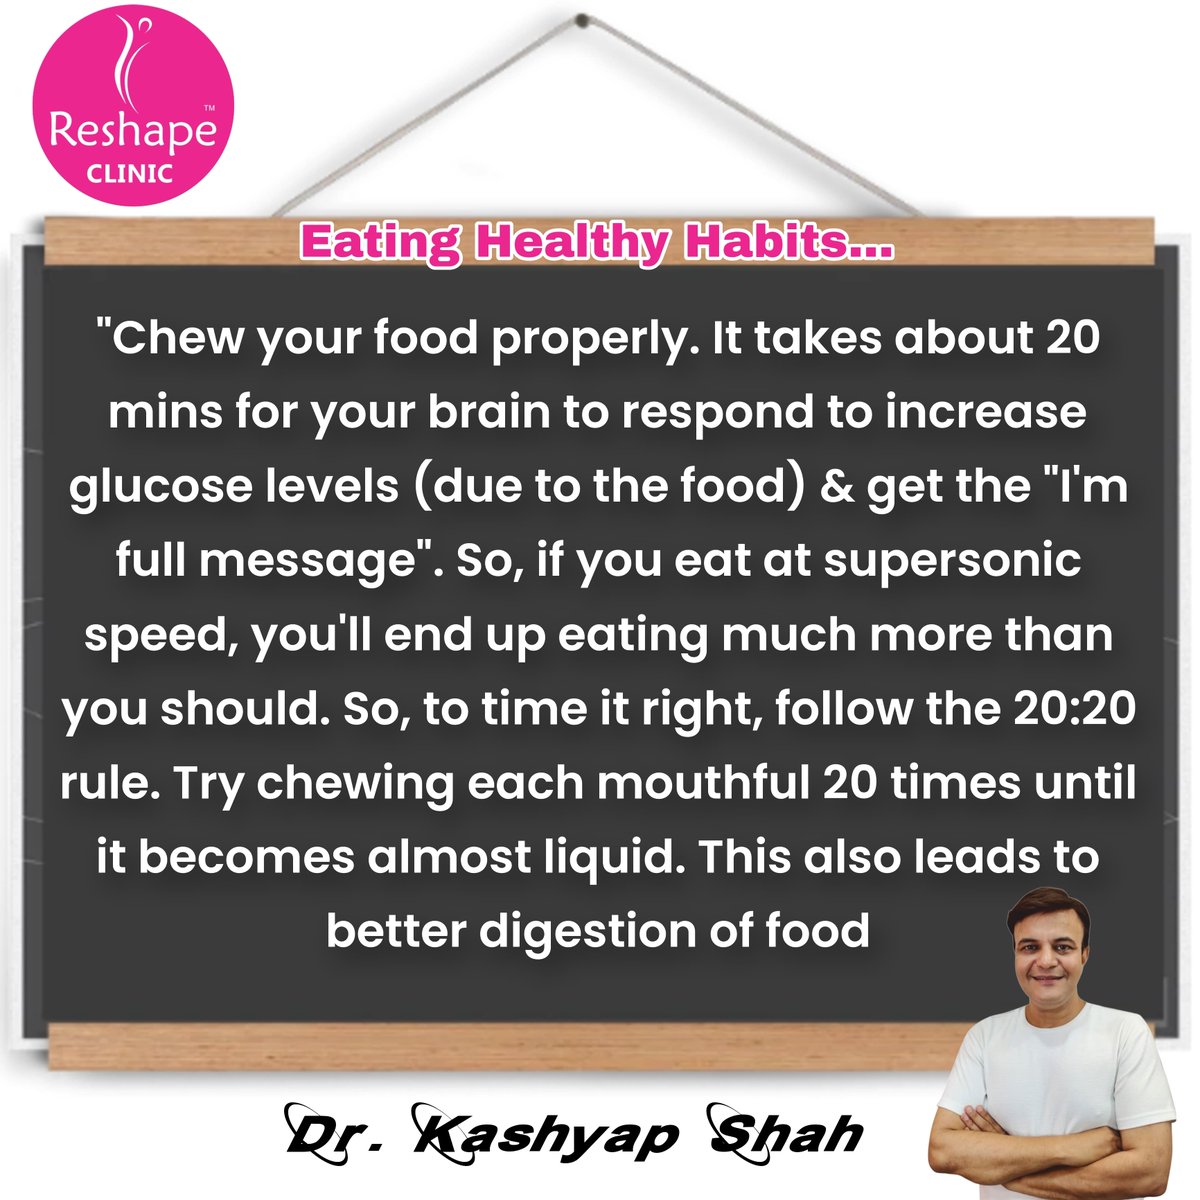 The 20-20-20 rule of eating is a strategy that focuses on mindful eating and portion control. It consists of three parts:

.
.
.
.
.
.
#EatMindfully #MindfulEating #HealthyEatingHabits #PortionControl #SlowDownAndSavor #reshapeclinic #drkashyapshah #20BiteRule #20MinuteMeals